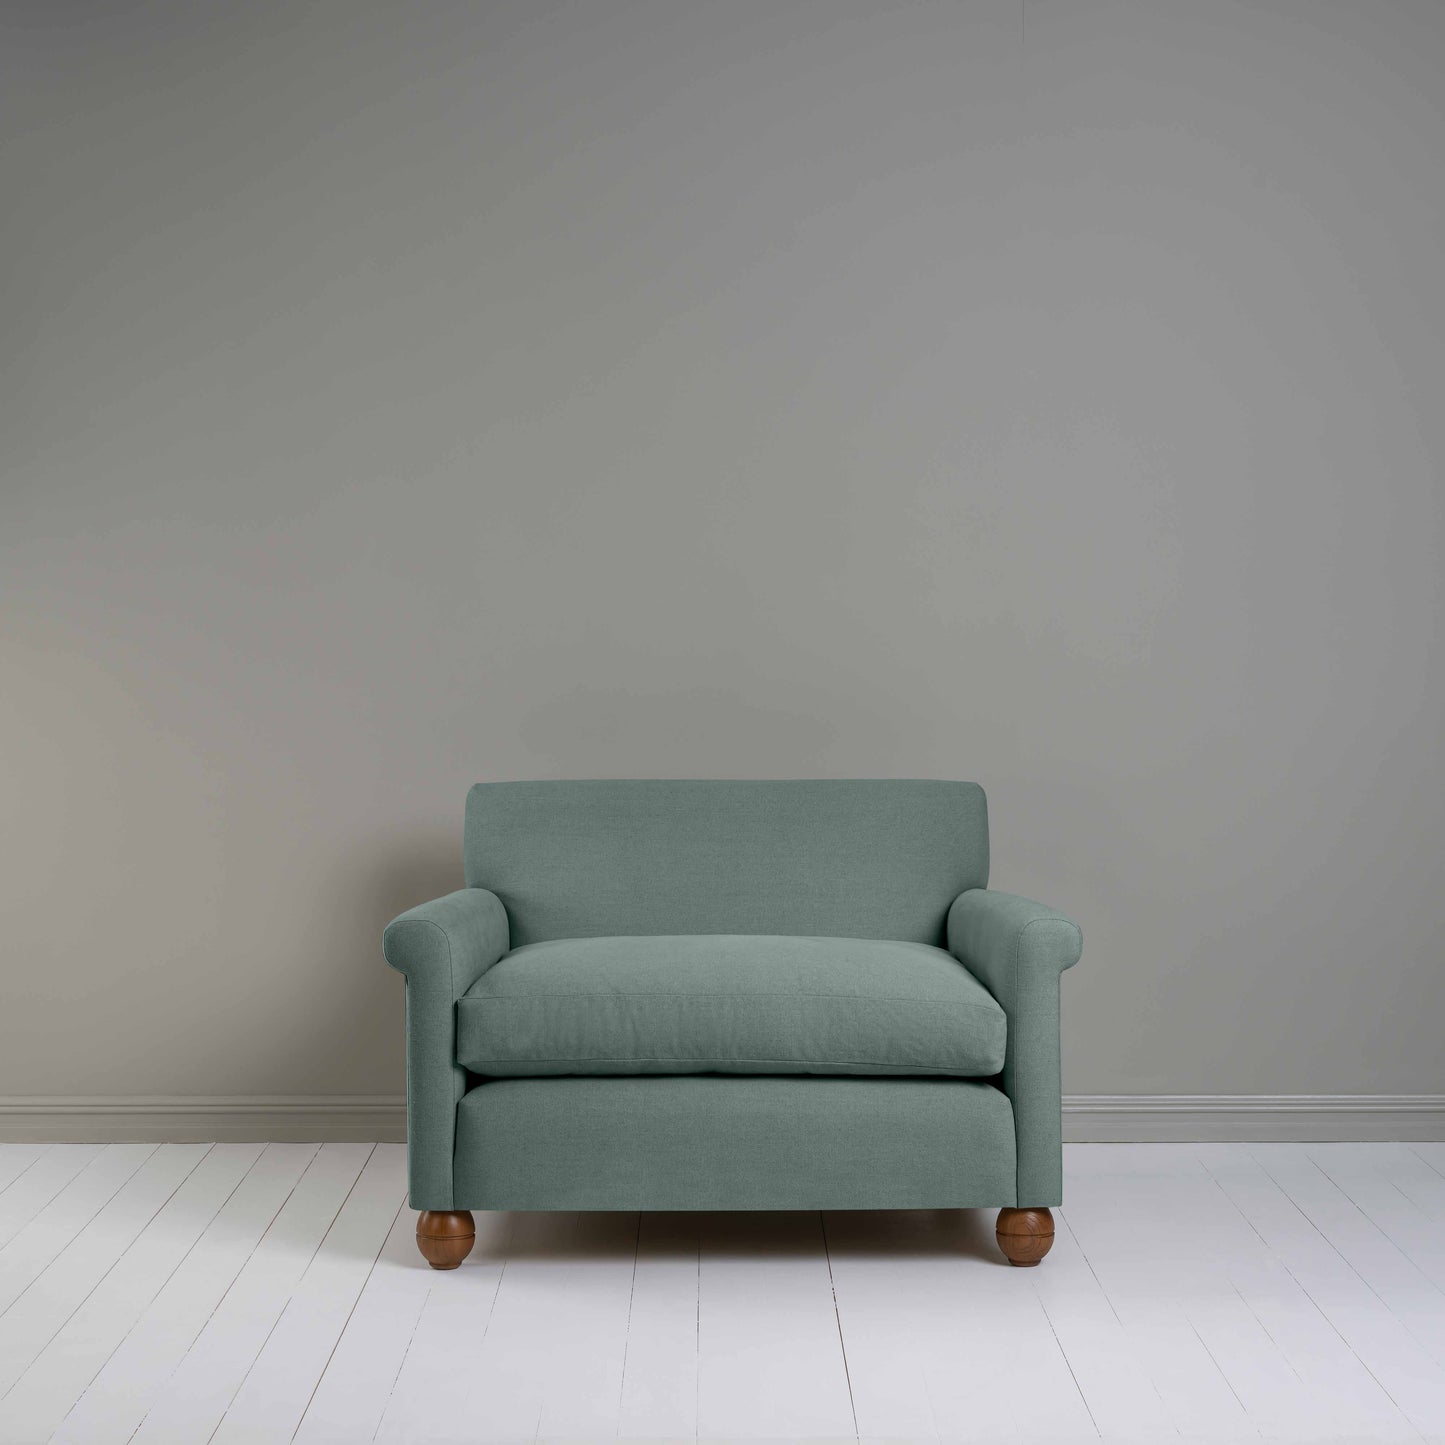 Idler Love Seat in Laidback Linen Mineral